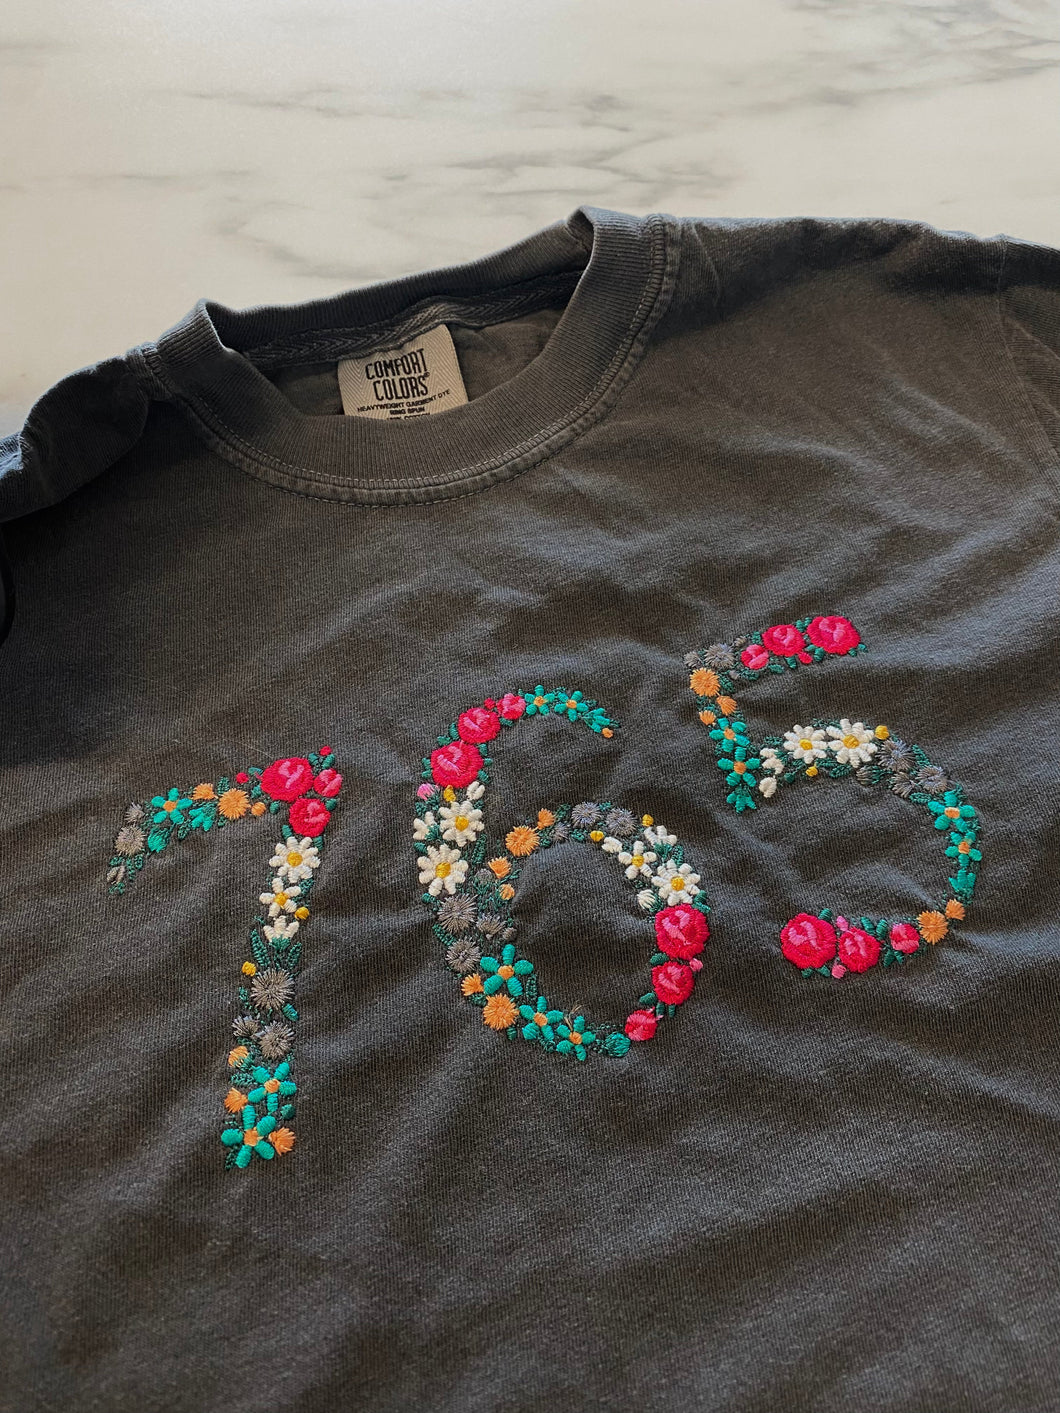 The Embroidered Floral Area Code Tee - Custom (Made To Order)